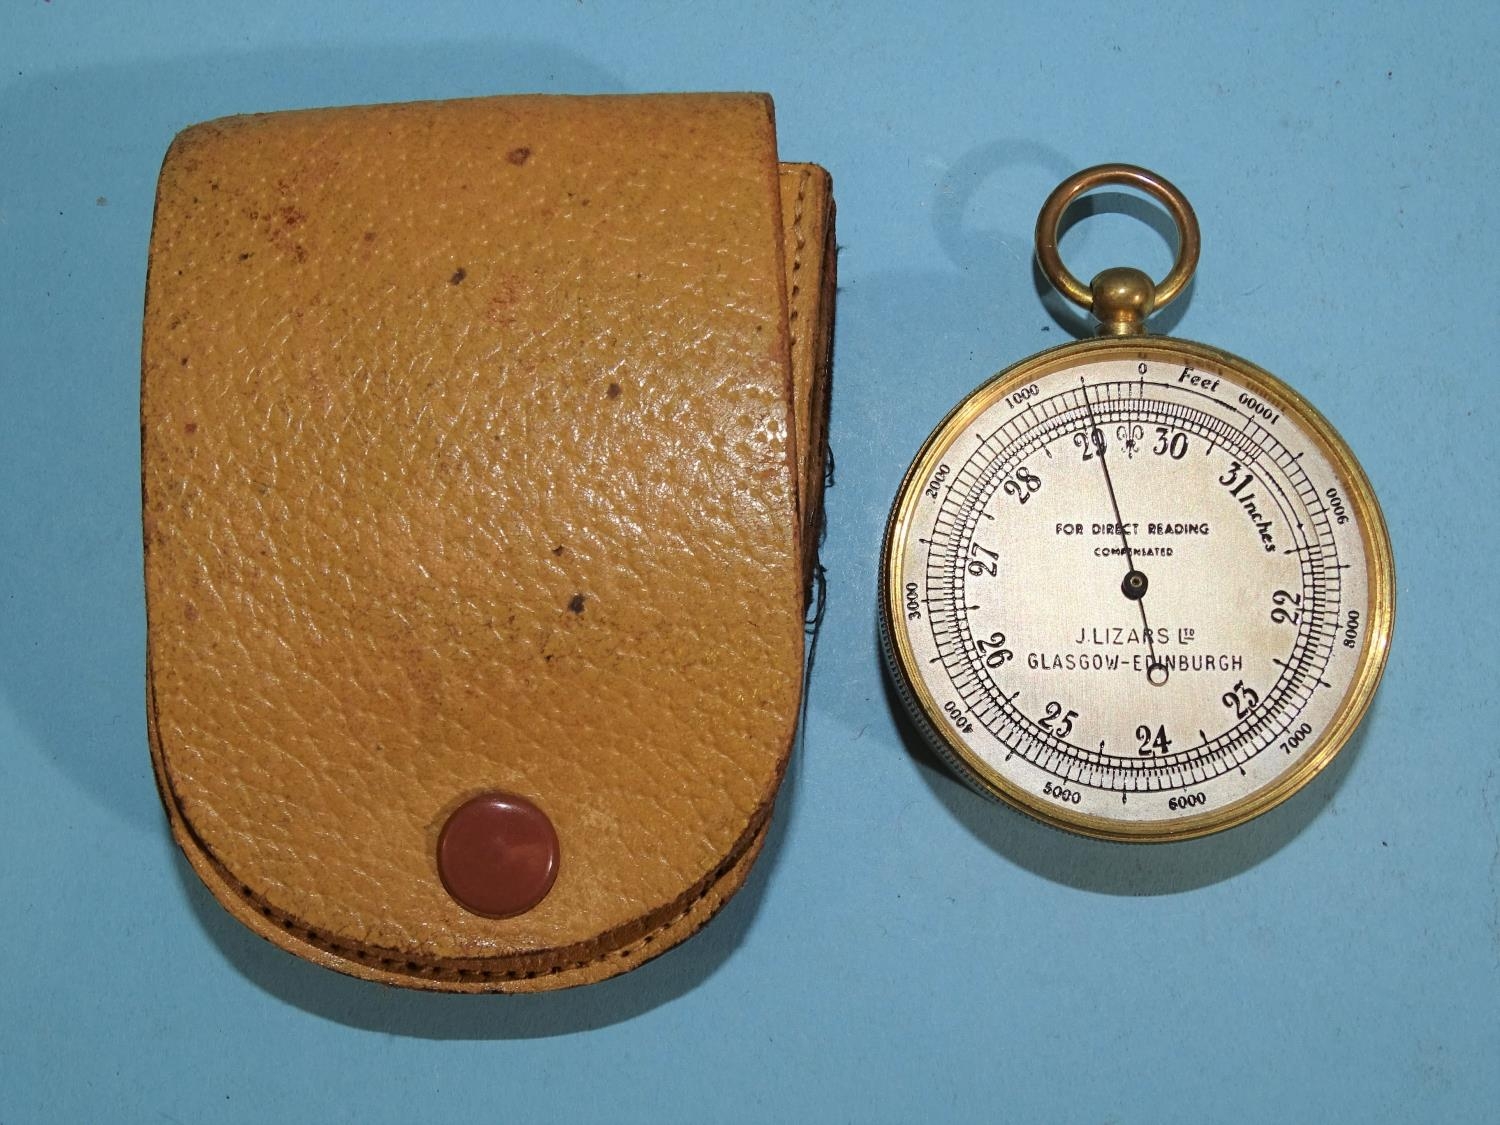 A compensated pocket barometer by J Lizars Ltd, Glasgow-Edinburgh, with silvered dial and brass